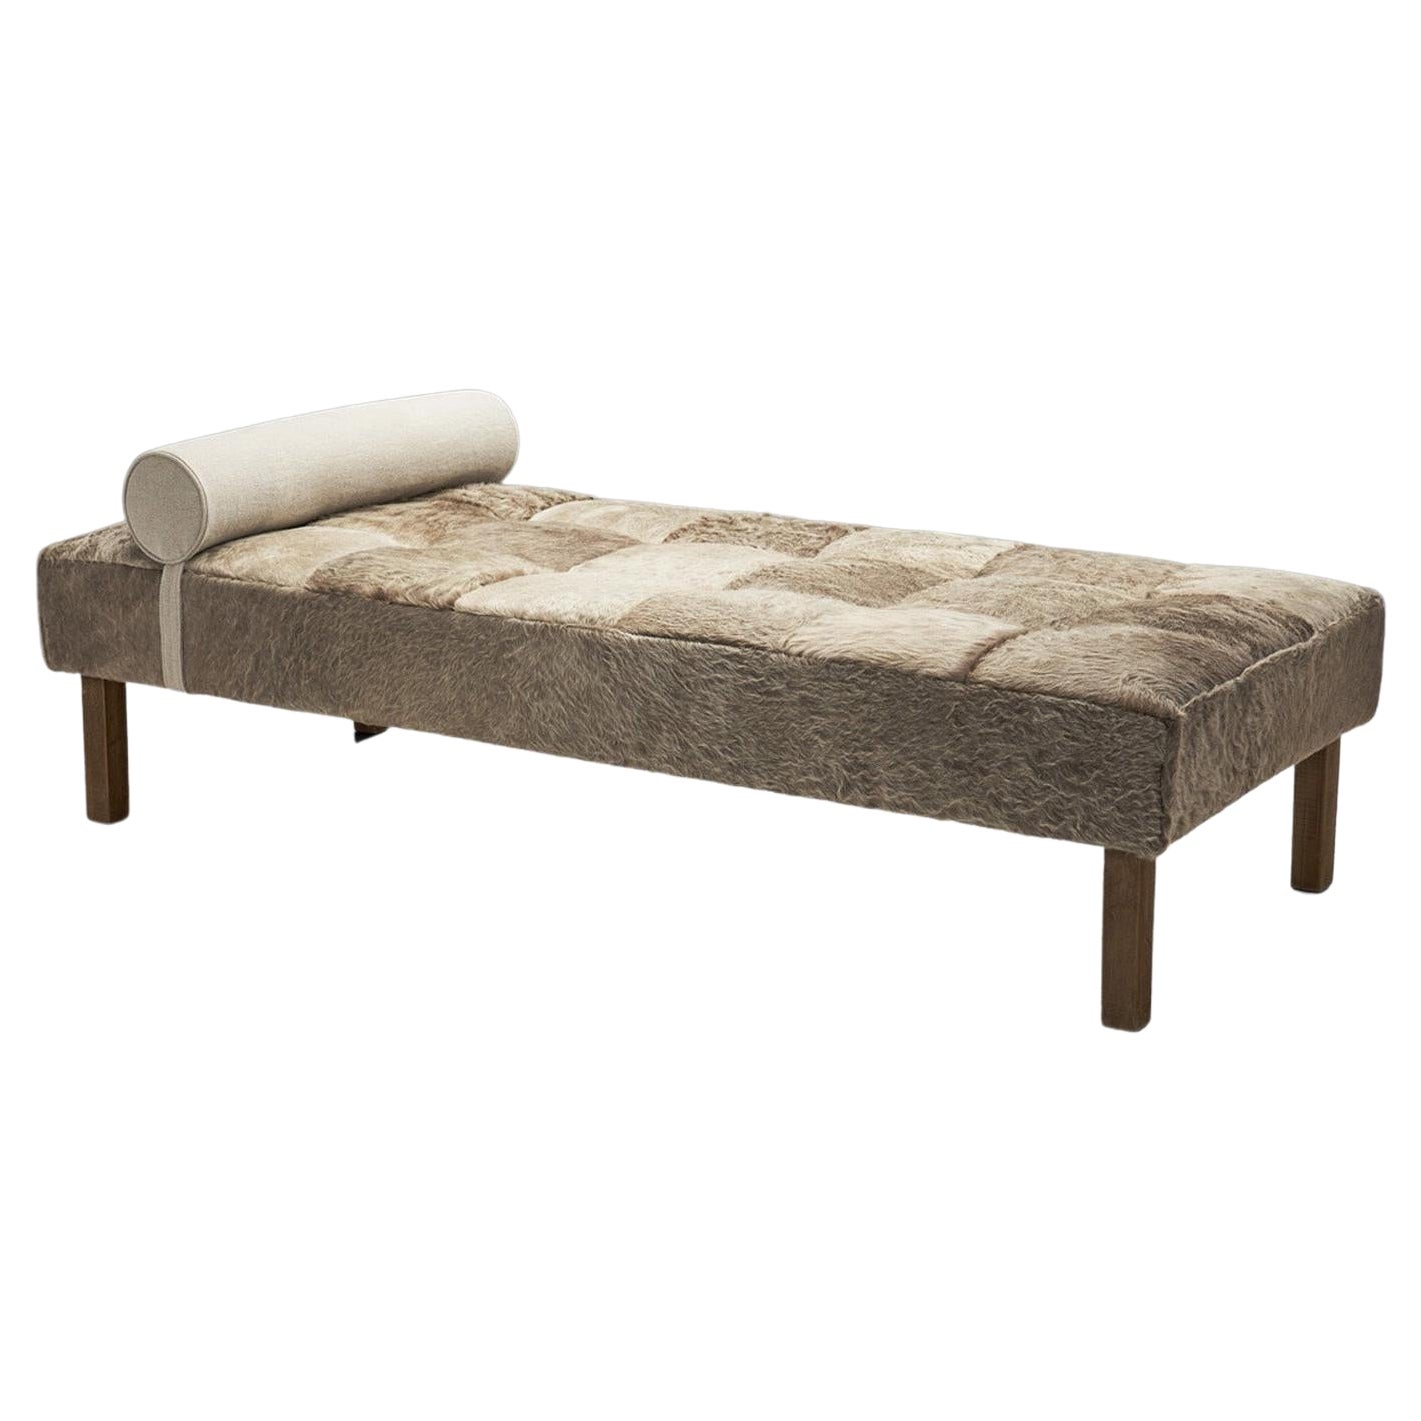 European Mid-Century Modern Daybed in Pony Hide, Europe ca 1950s For Sale